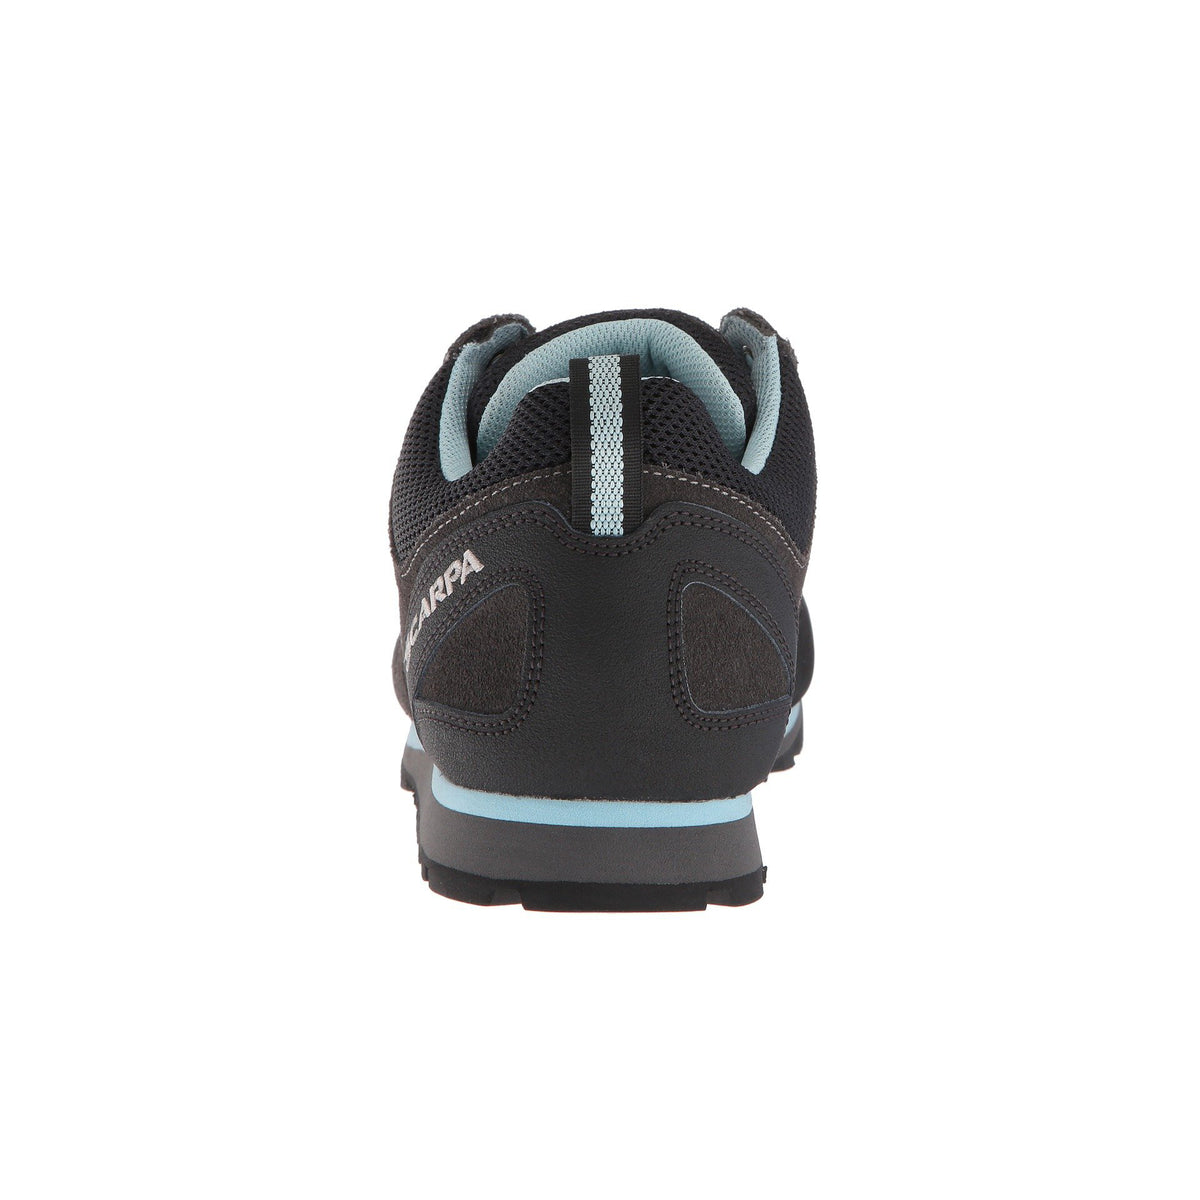 Scarpa Crux Womens approach shoe view from behind, showing the heel design detail